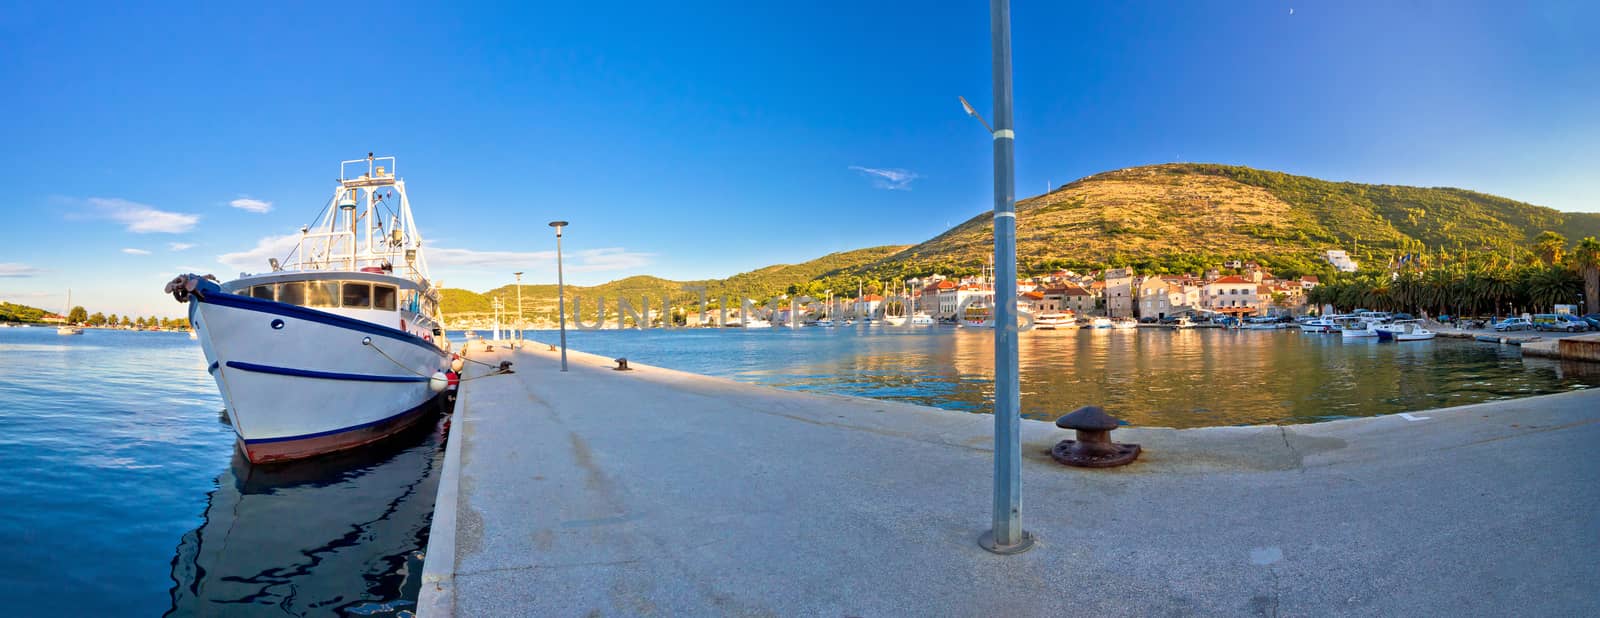 Town of Vis panoramic harbor view by xbrchx